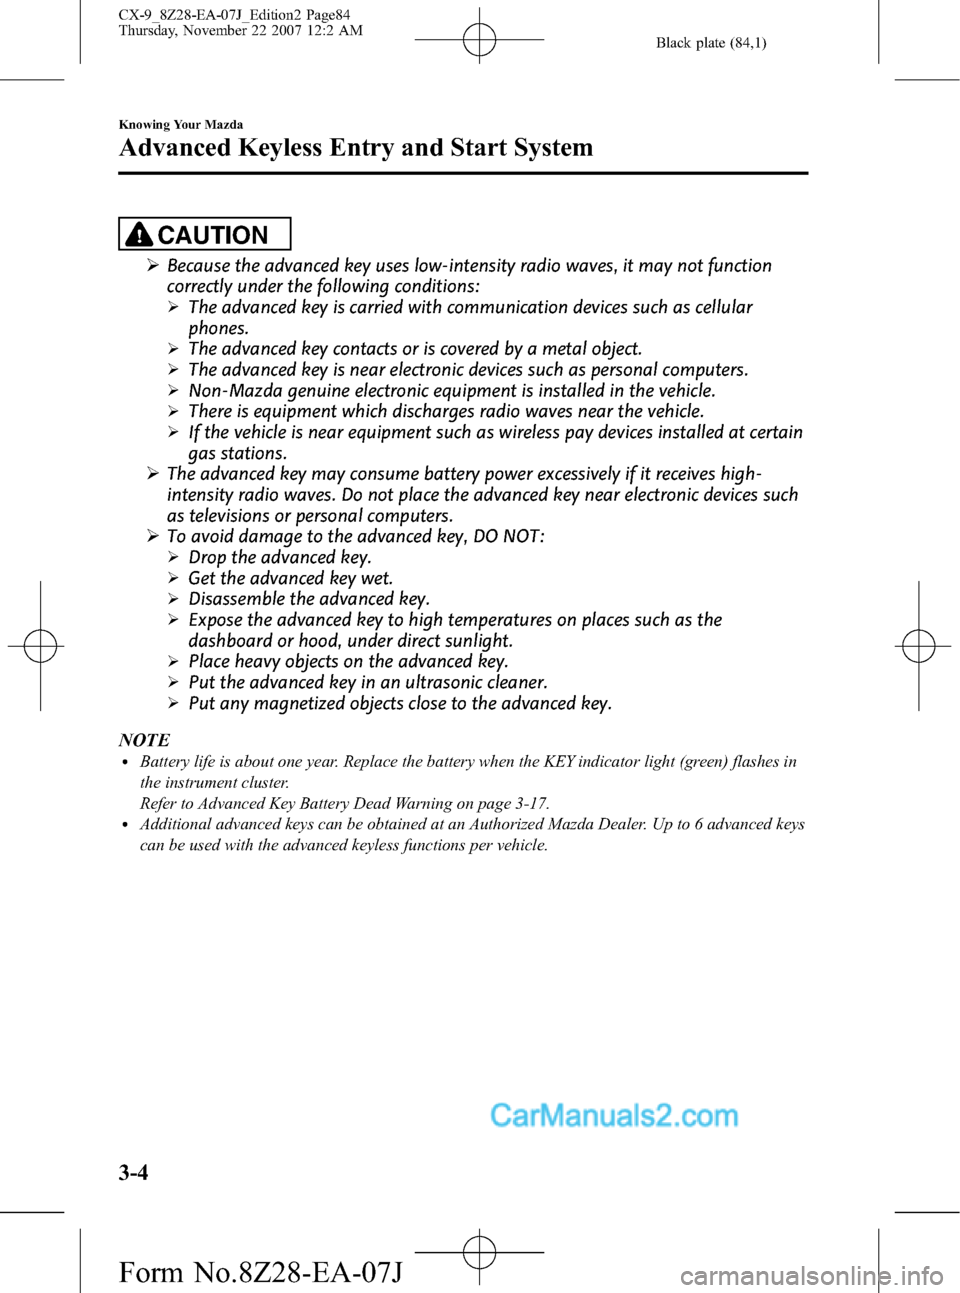 MAZDA MODEL CX-9 2008  Owners Manual (in English) Black plate (84,1)
CAUTION
ØBecause the advanced key uses low-intensity radio waves, it may not function
correctly under the following conditions:
ØThe advanced key is carried with communication dev